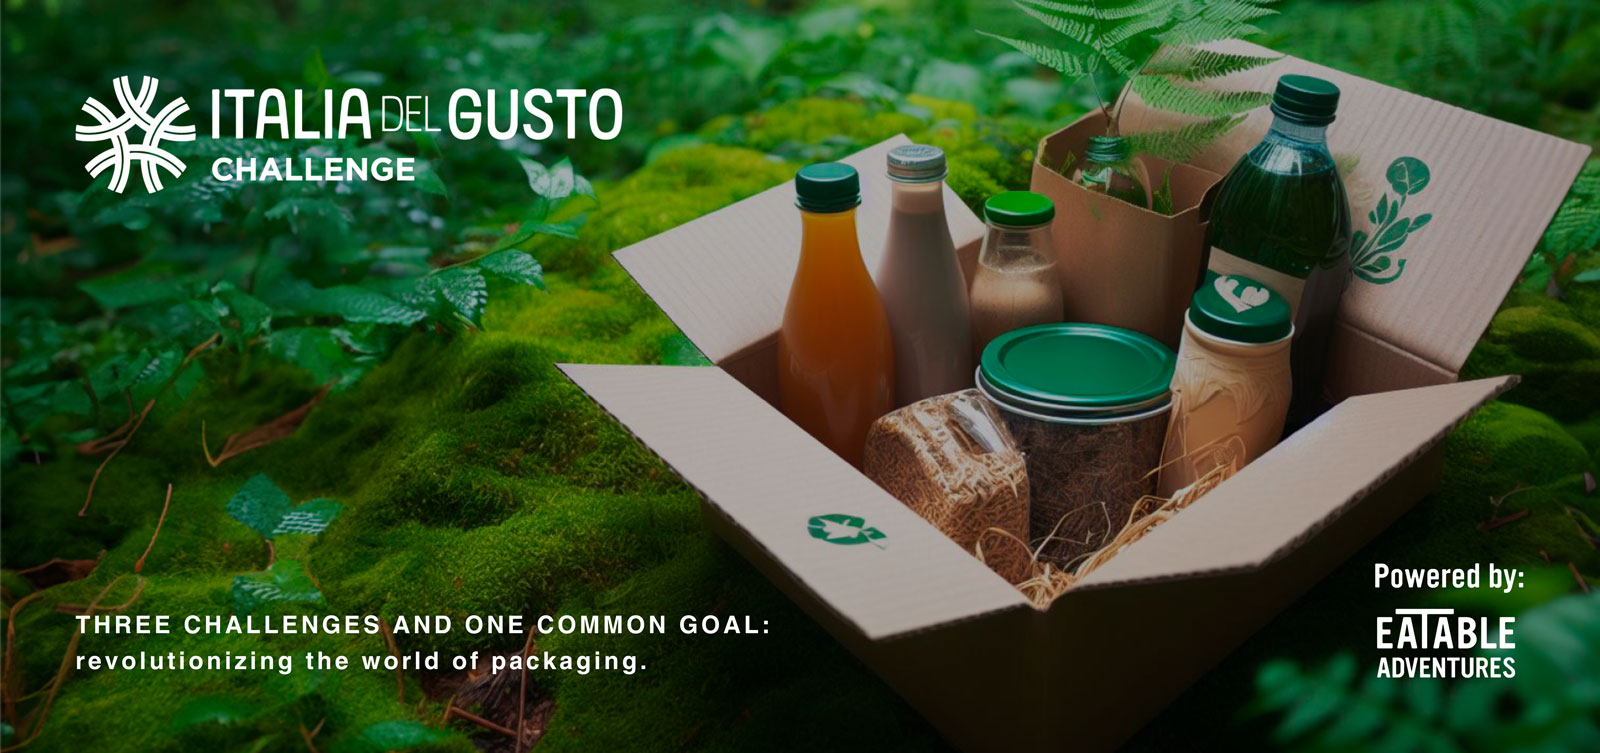 Three challenges and one common goal: revolutionizing the world of packaging!